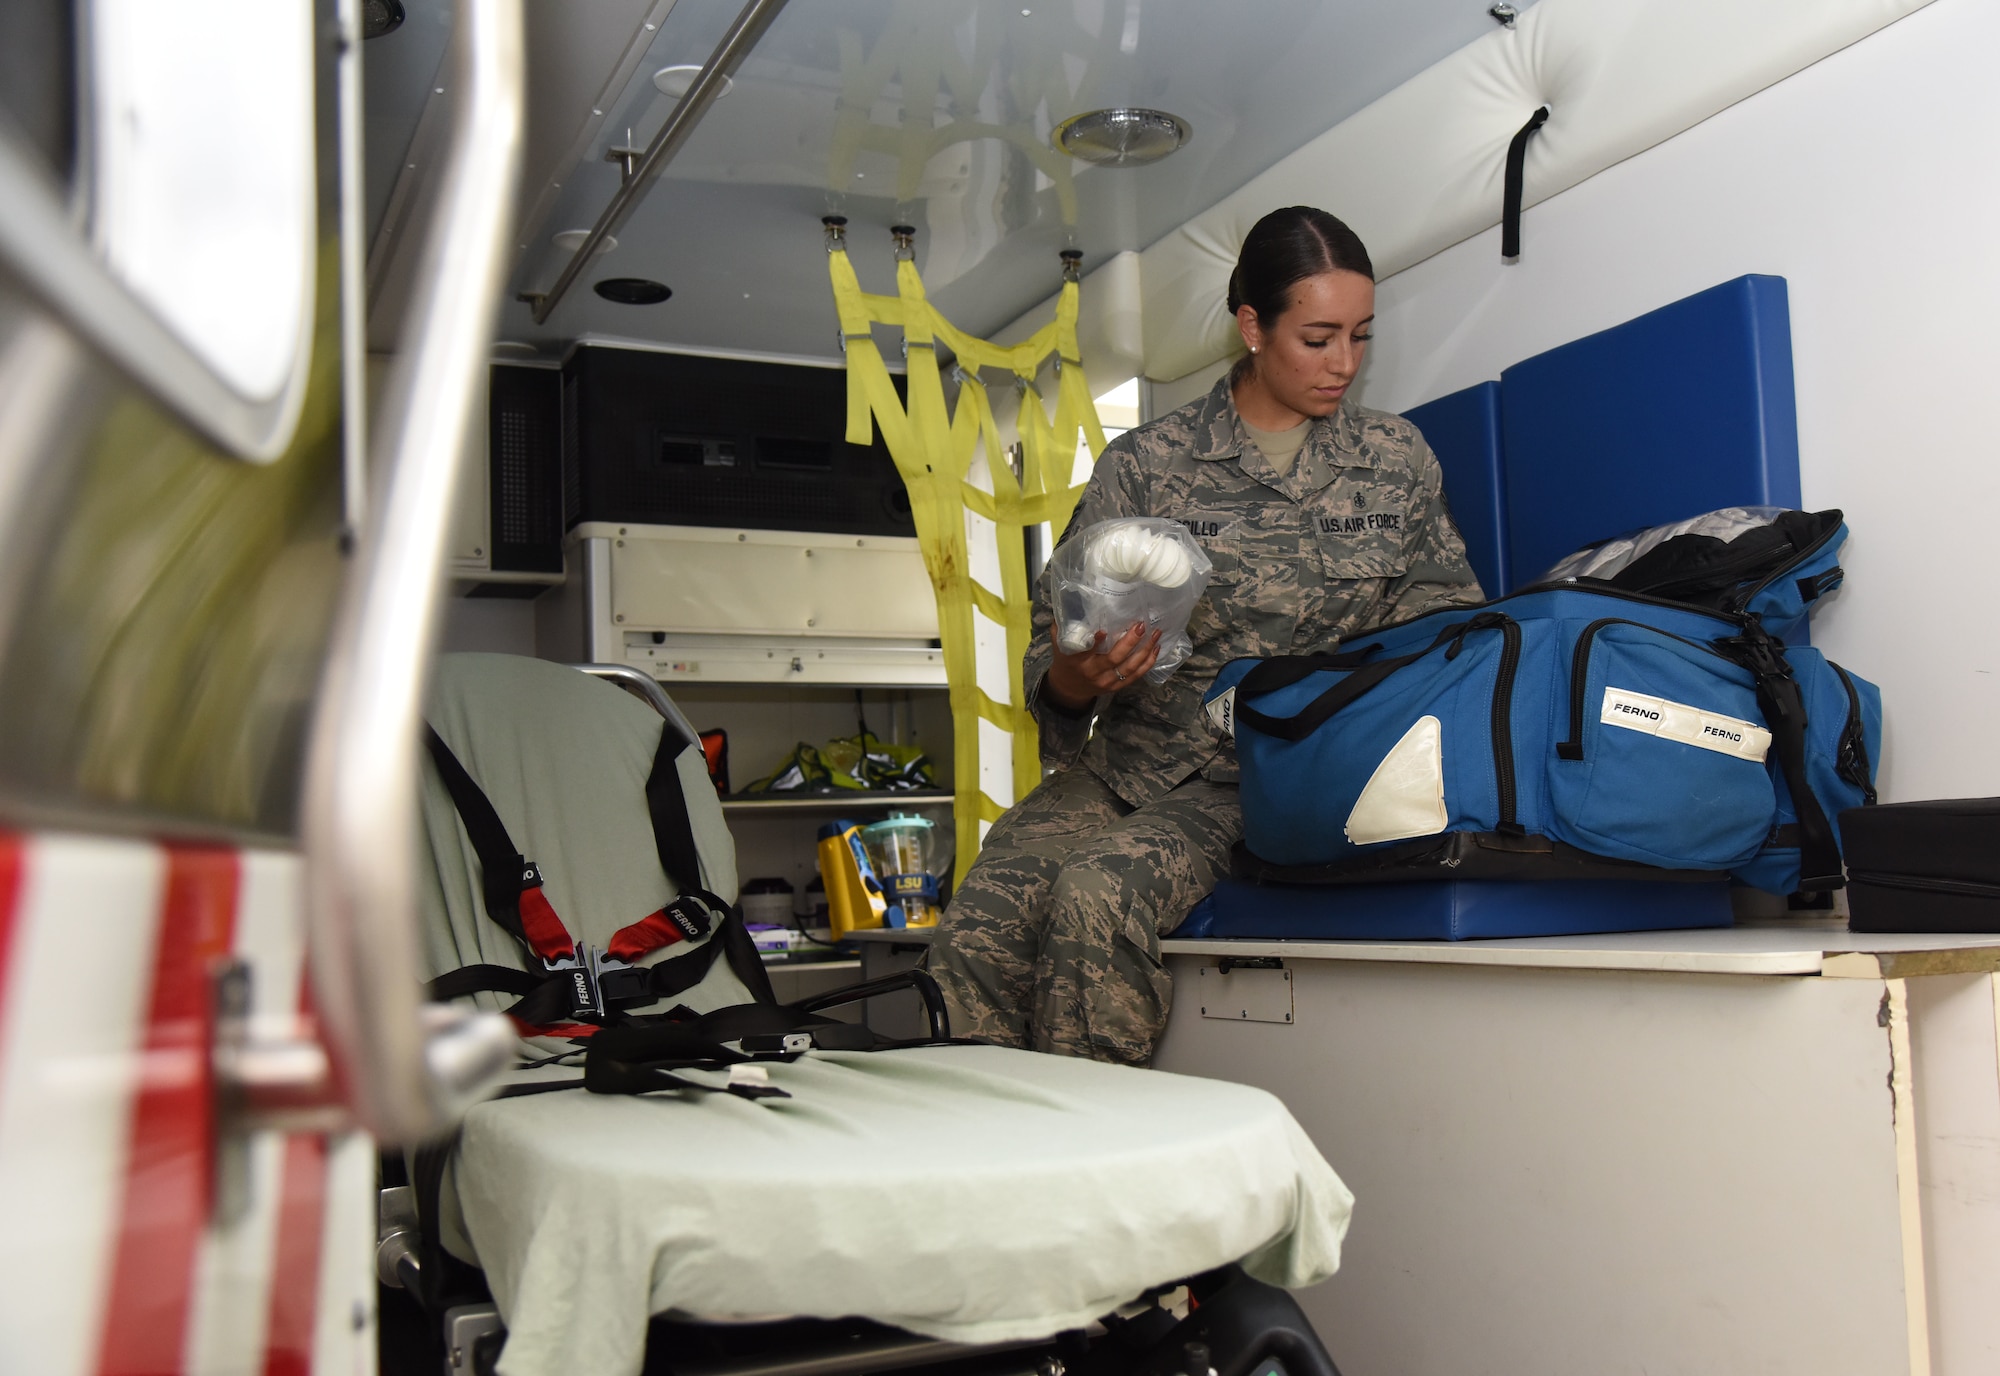 U.S. Air Force Tech. Sgt. Juliet Corcillo, 81st Medical Operations Squadron Emergency Department NCO in charge, conducts a daily function check inside an ambulance at Keesler Air Force Base, Mississippi, June 14, 2018. Corcillo will begin her first day of medical school July 6 with a four-year scholarship from the Air Force’s Health Professions Scholarship Program. (U.S. Air Force photo by Kemberly Groue)